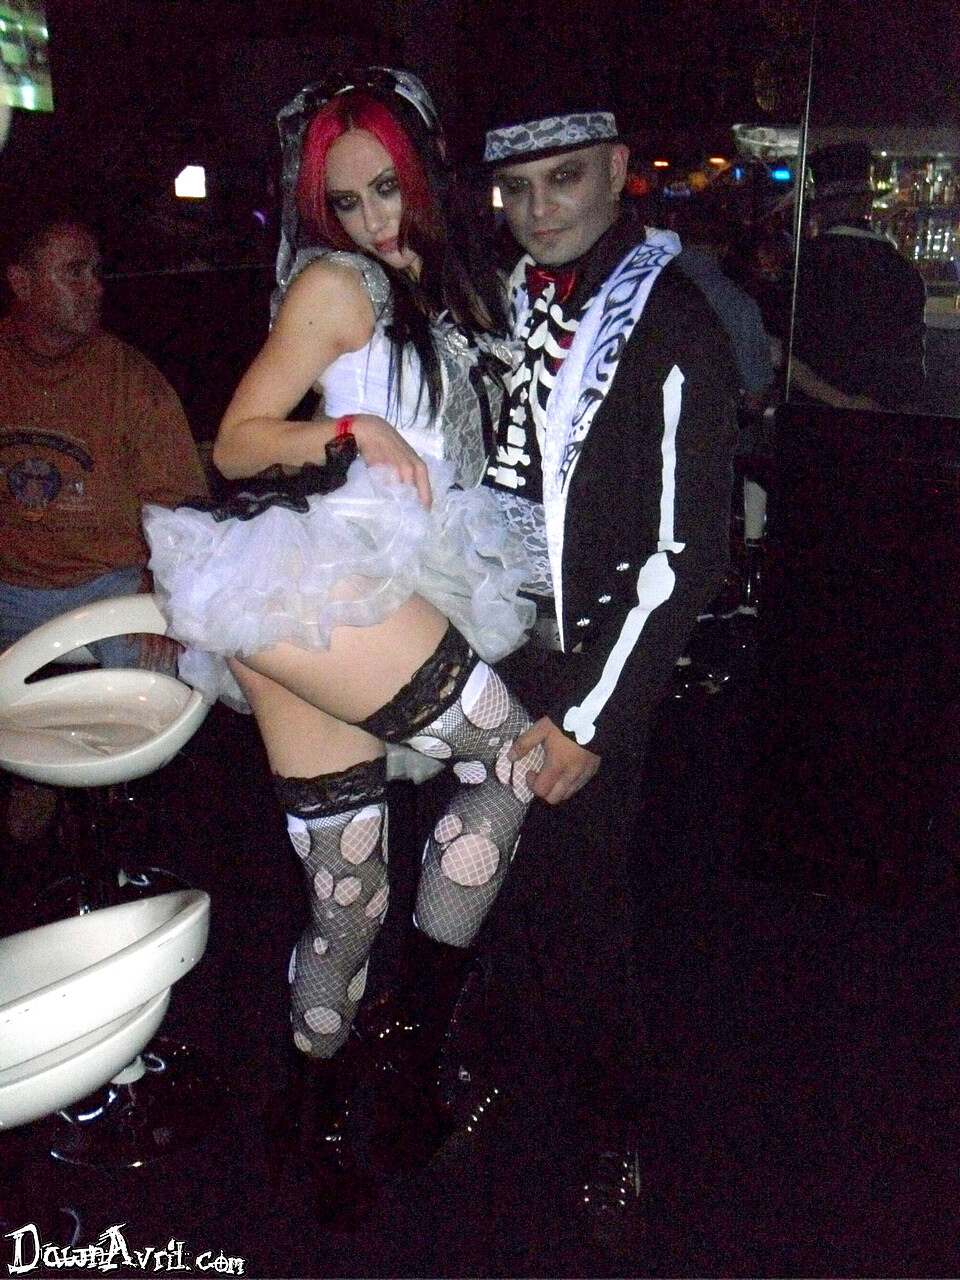 Halloween Party Upskirt - Babe Today Dawn Avril Dawn Avril Tightpussy Upskirt Free Edition Mobile Porn  Pics